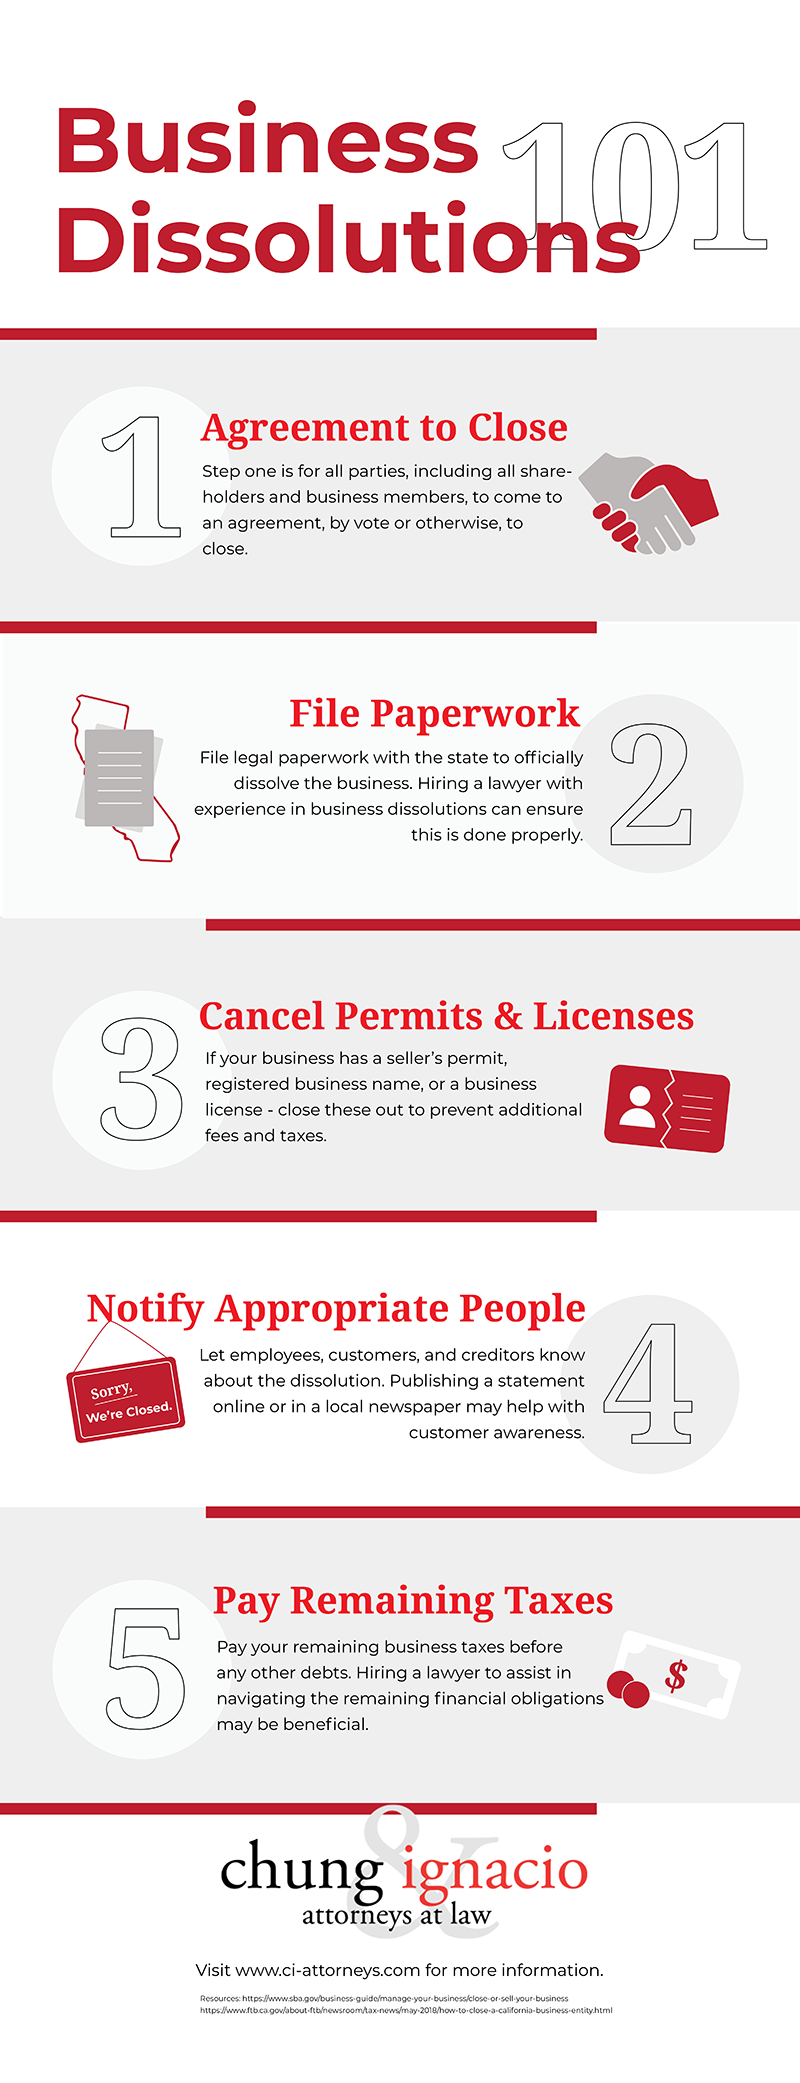 [INFOGRAPHIC] Business Dissolutions 101